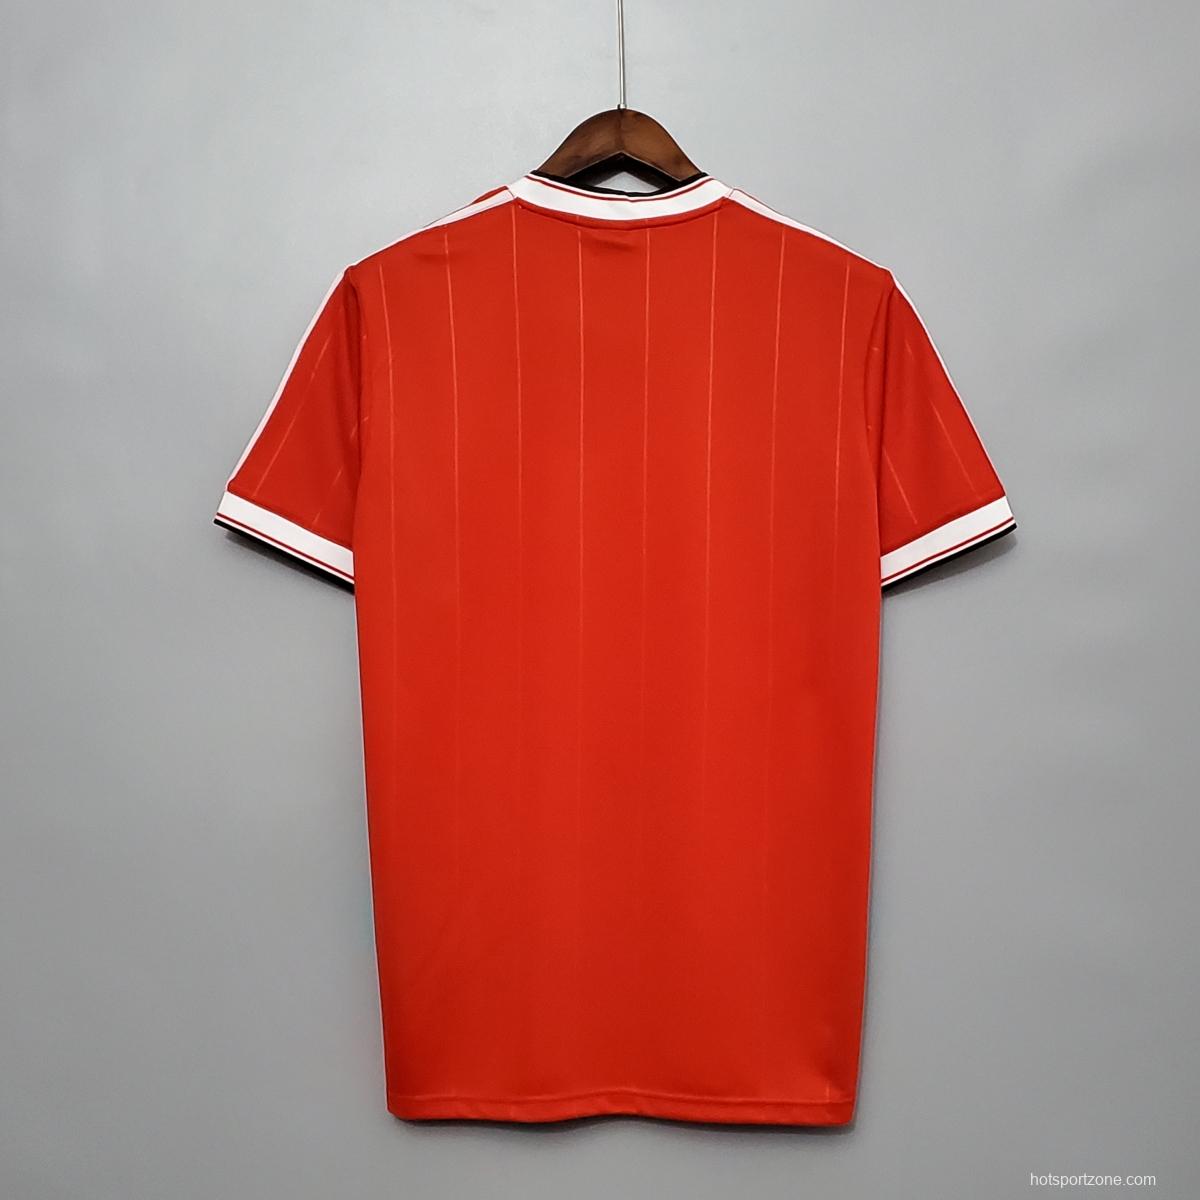 Retro 83/84 Manchester United home Soccer Jersey